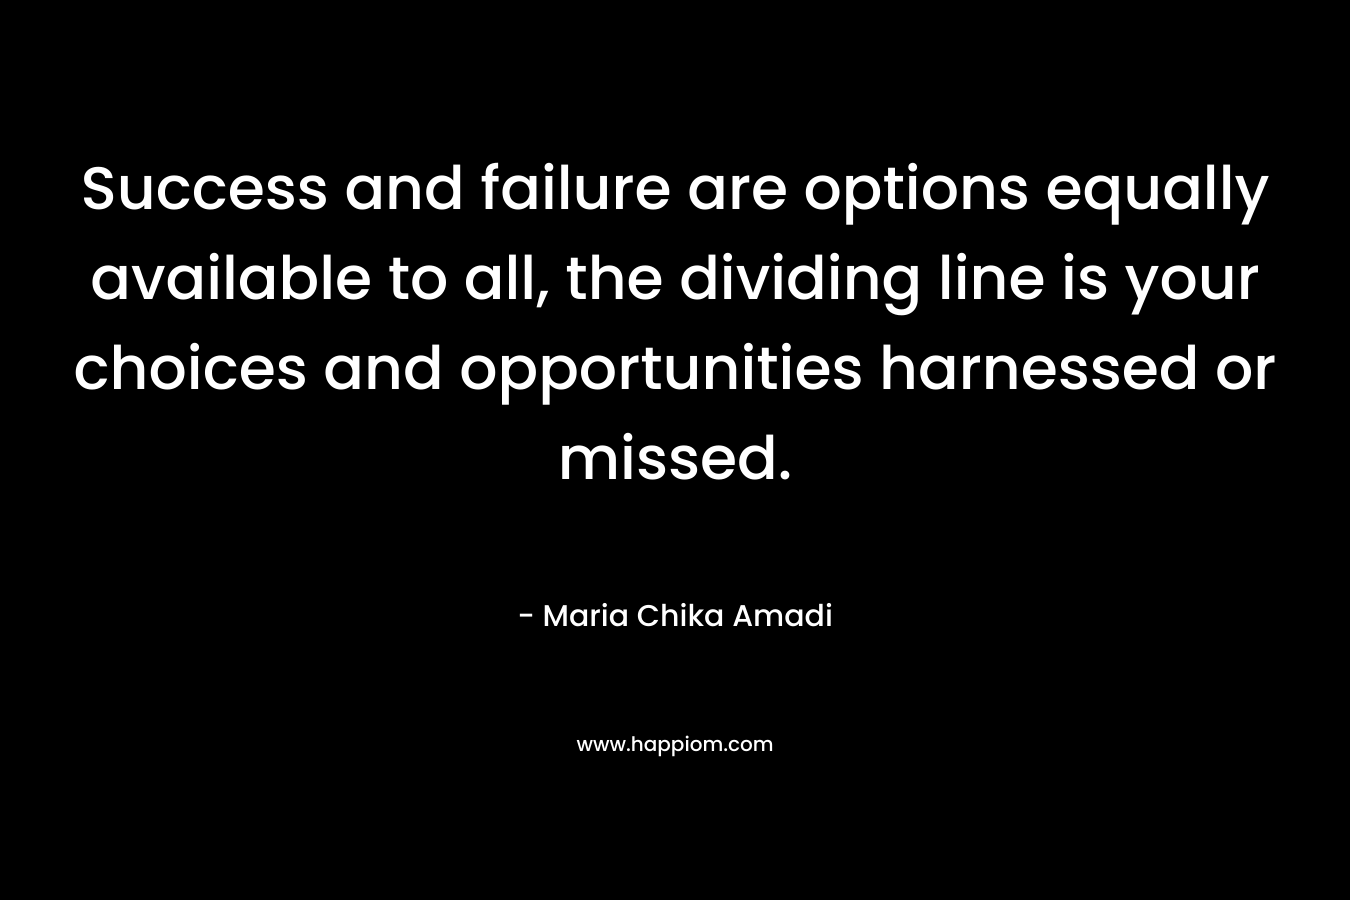 Success and failure are options equally available to all, the dividing line is your choices and opportunities harnessed or missed.